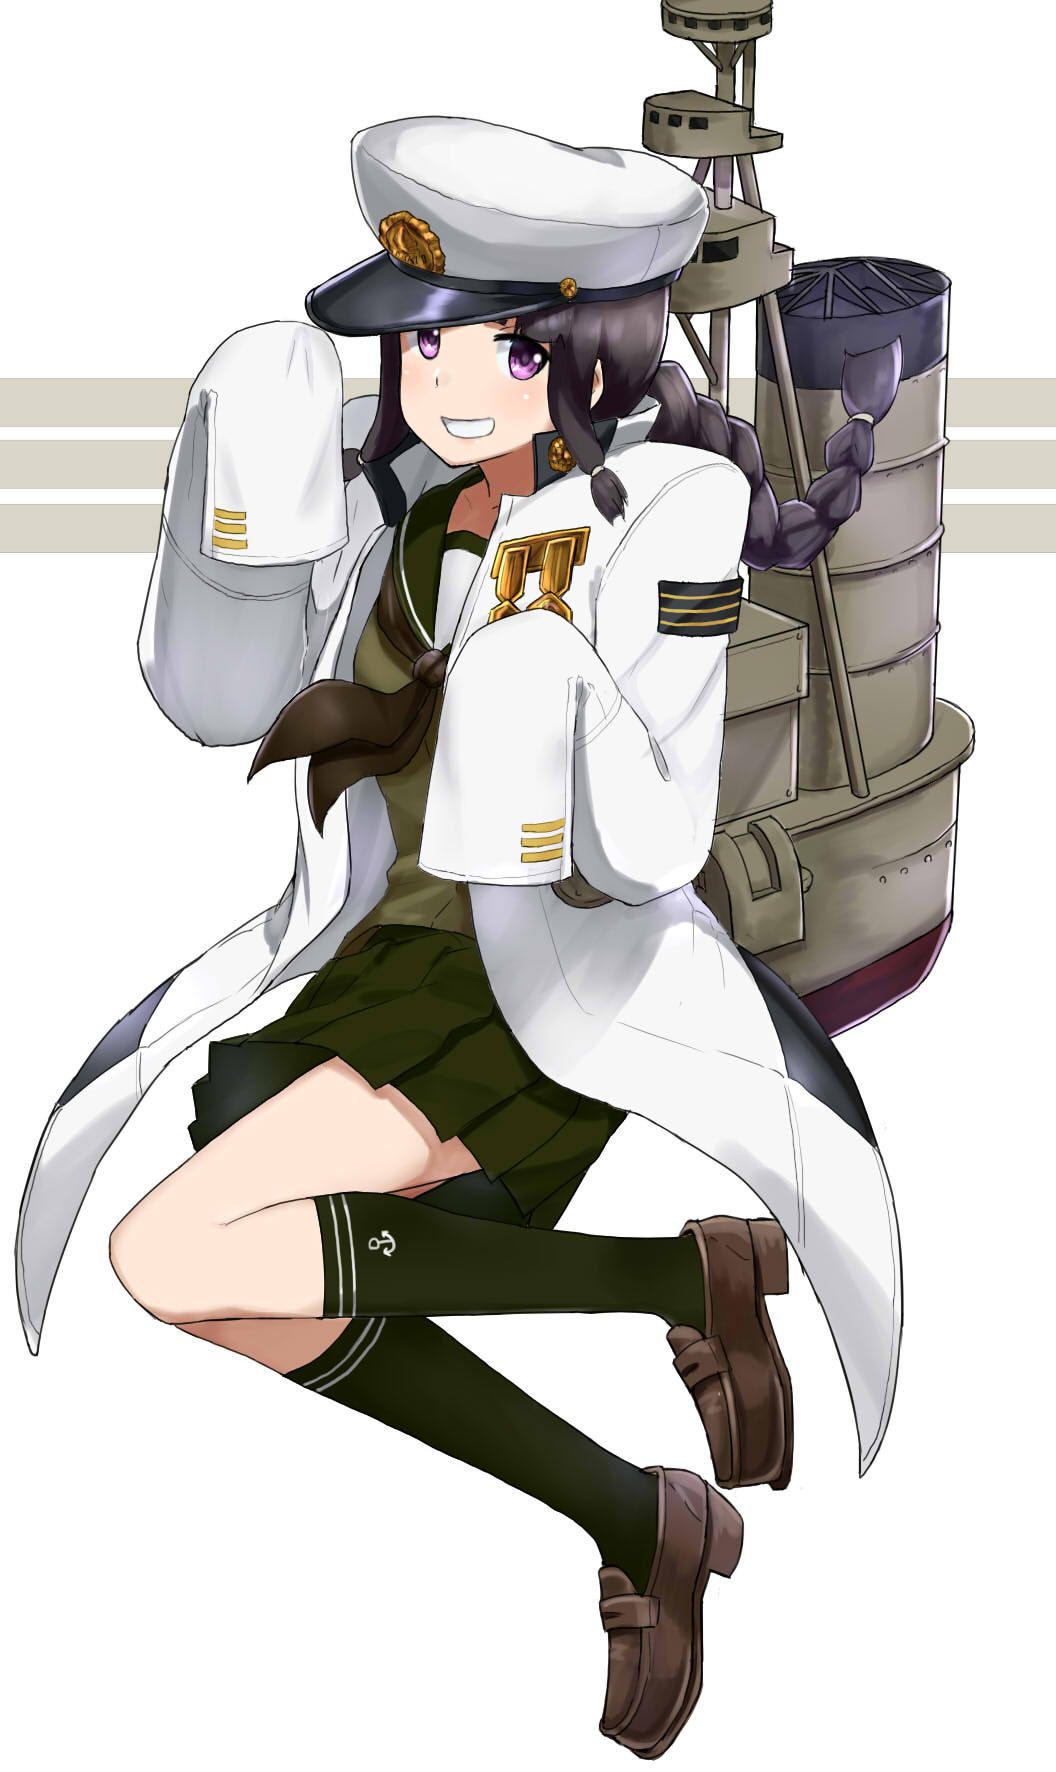 【There is an image】 Kitakami lifts the ban on the real thing in the dark customs www (Fleet Kokushōn) 8